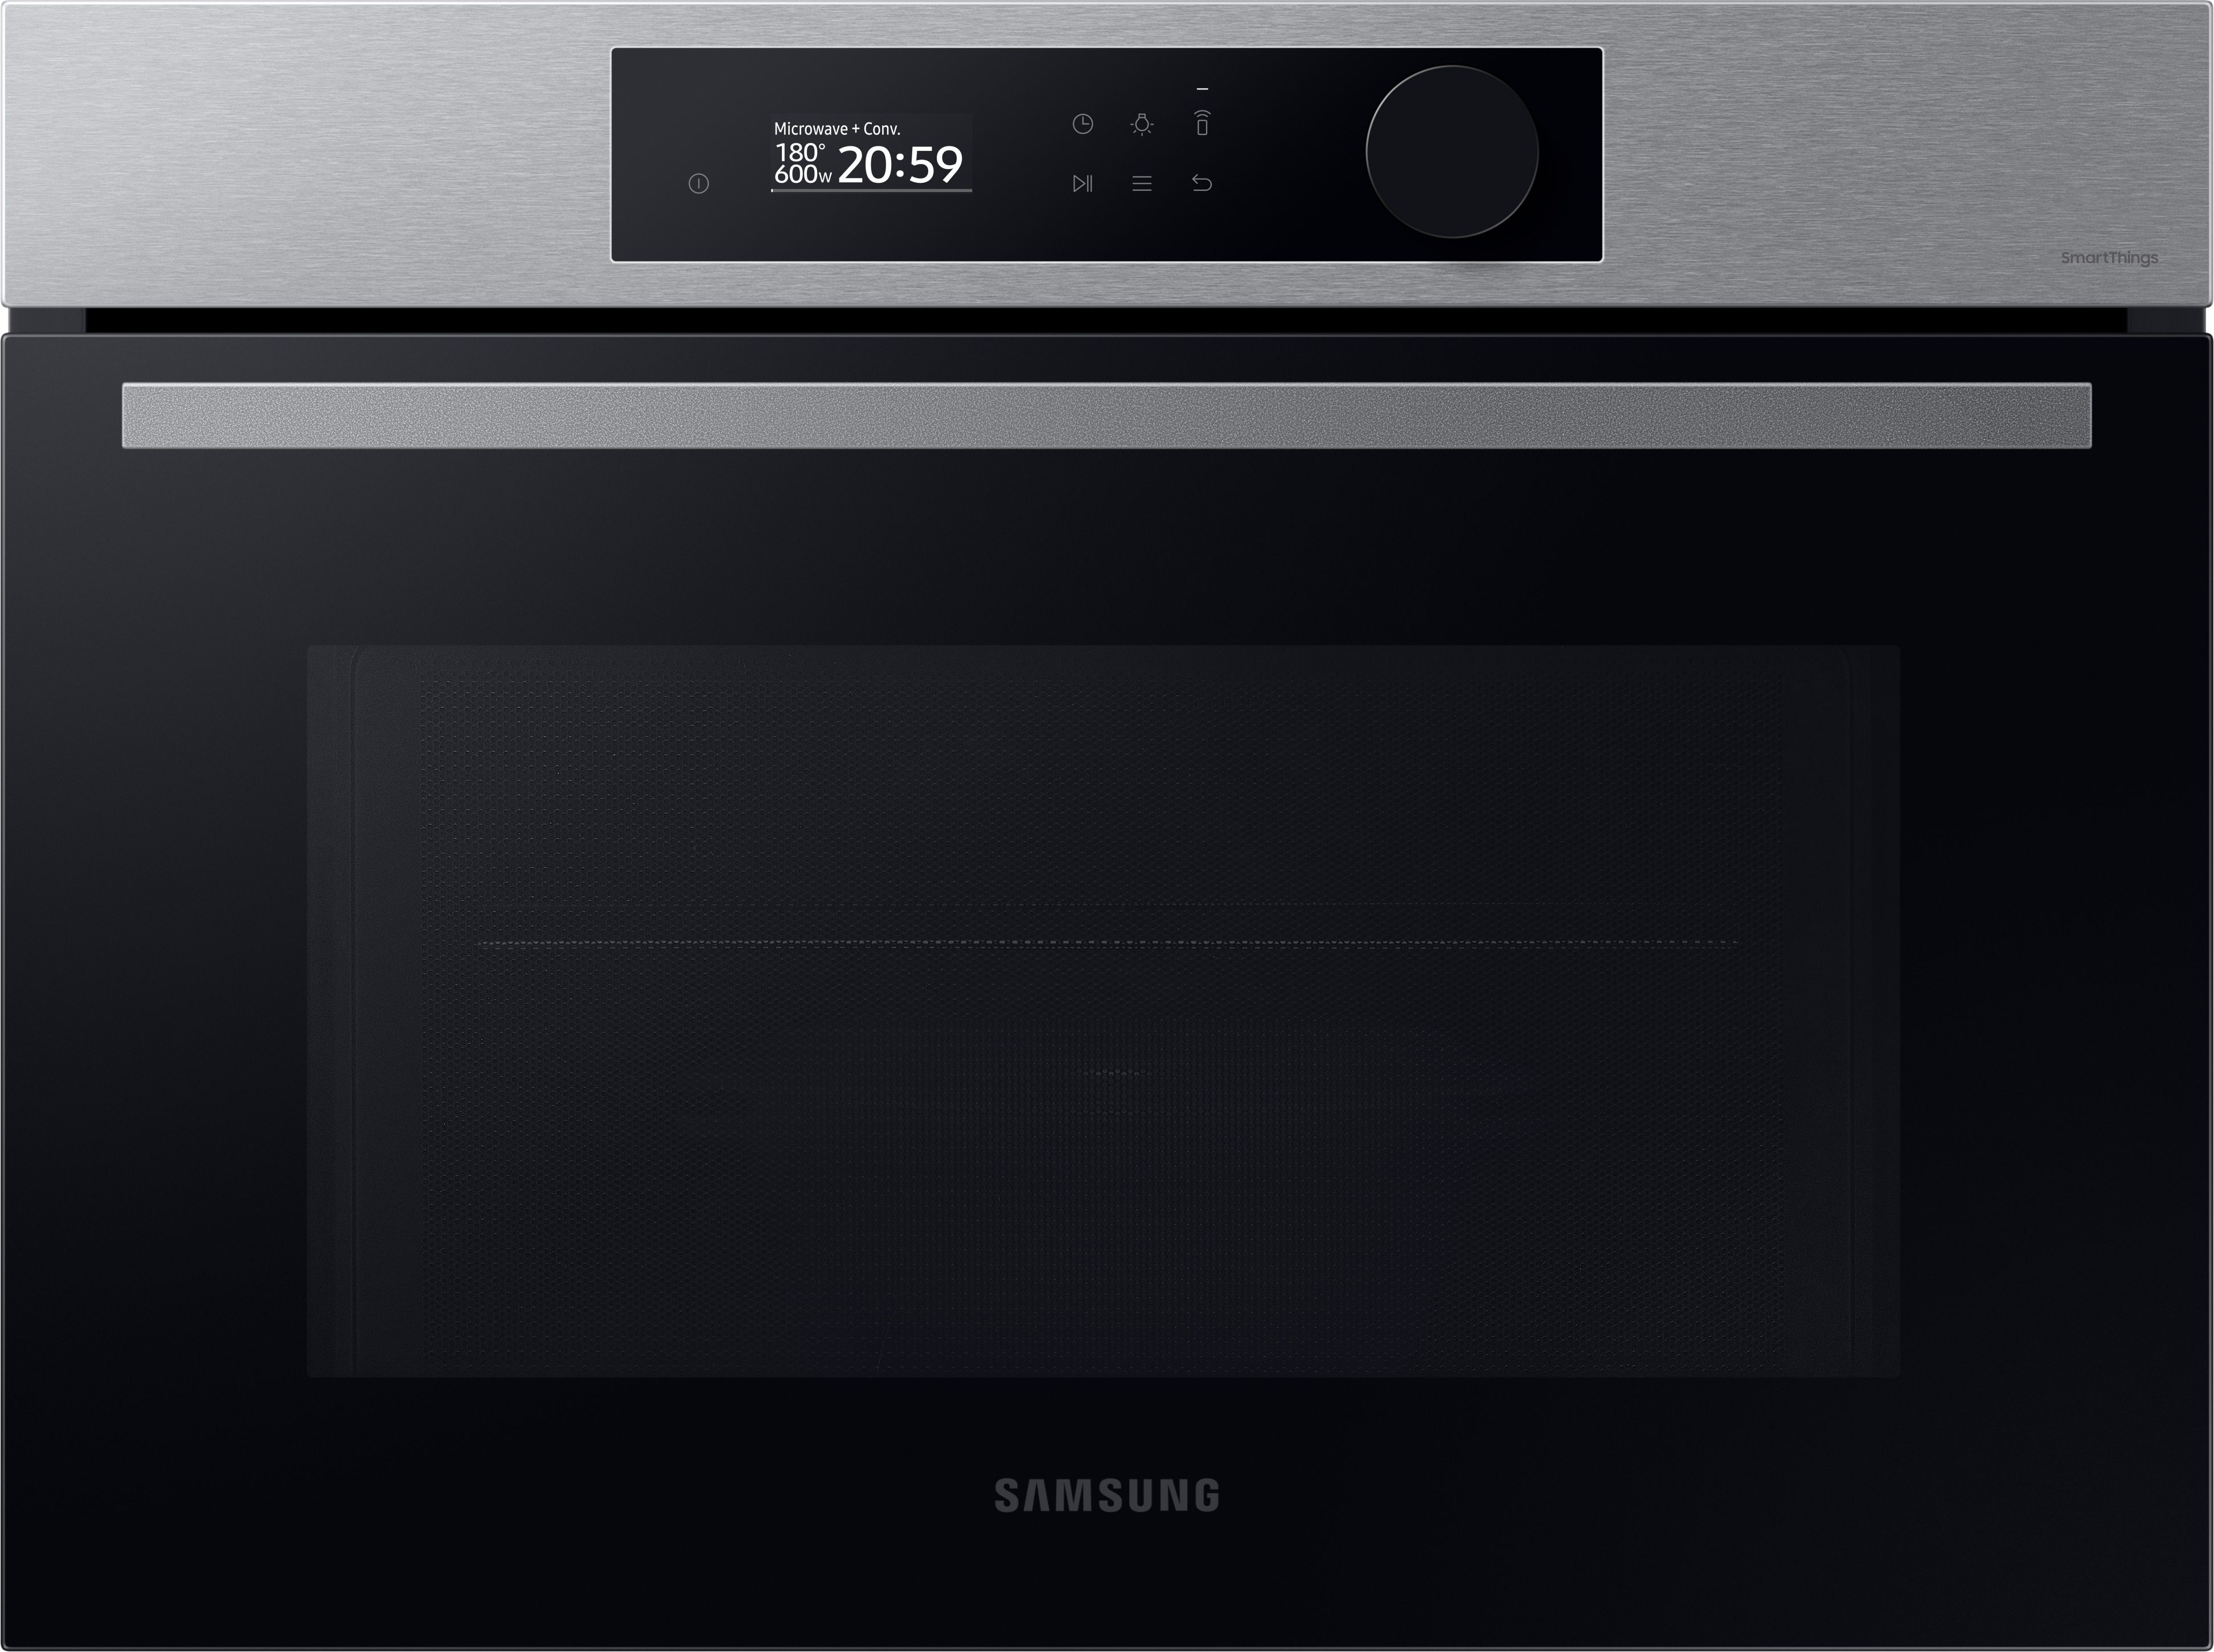 Samsung Bespoke Series 5 NQ5B5763DBS Wifi Connected Built In Compact Electric Single Oven with Microwave Function - Stainless Steel, Stainless Steel